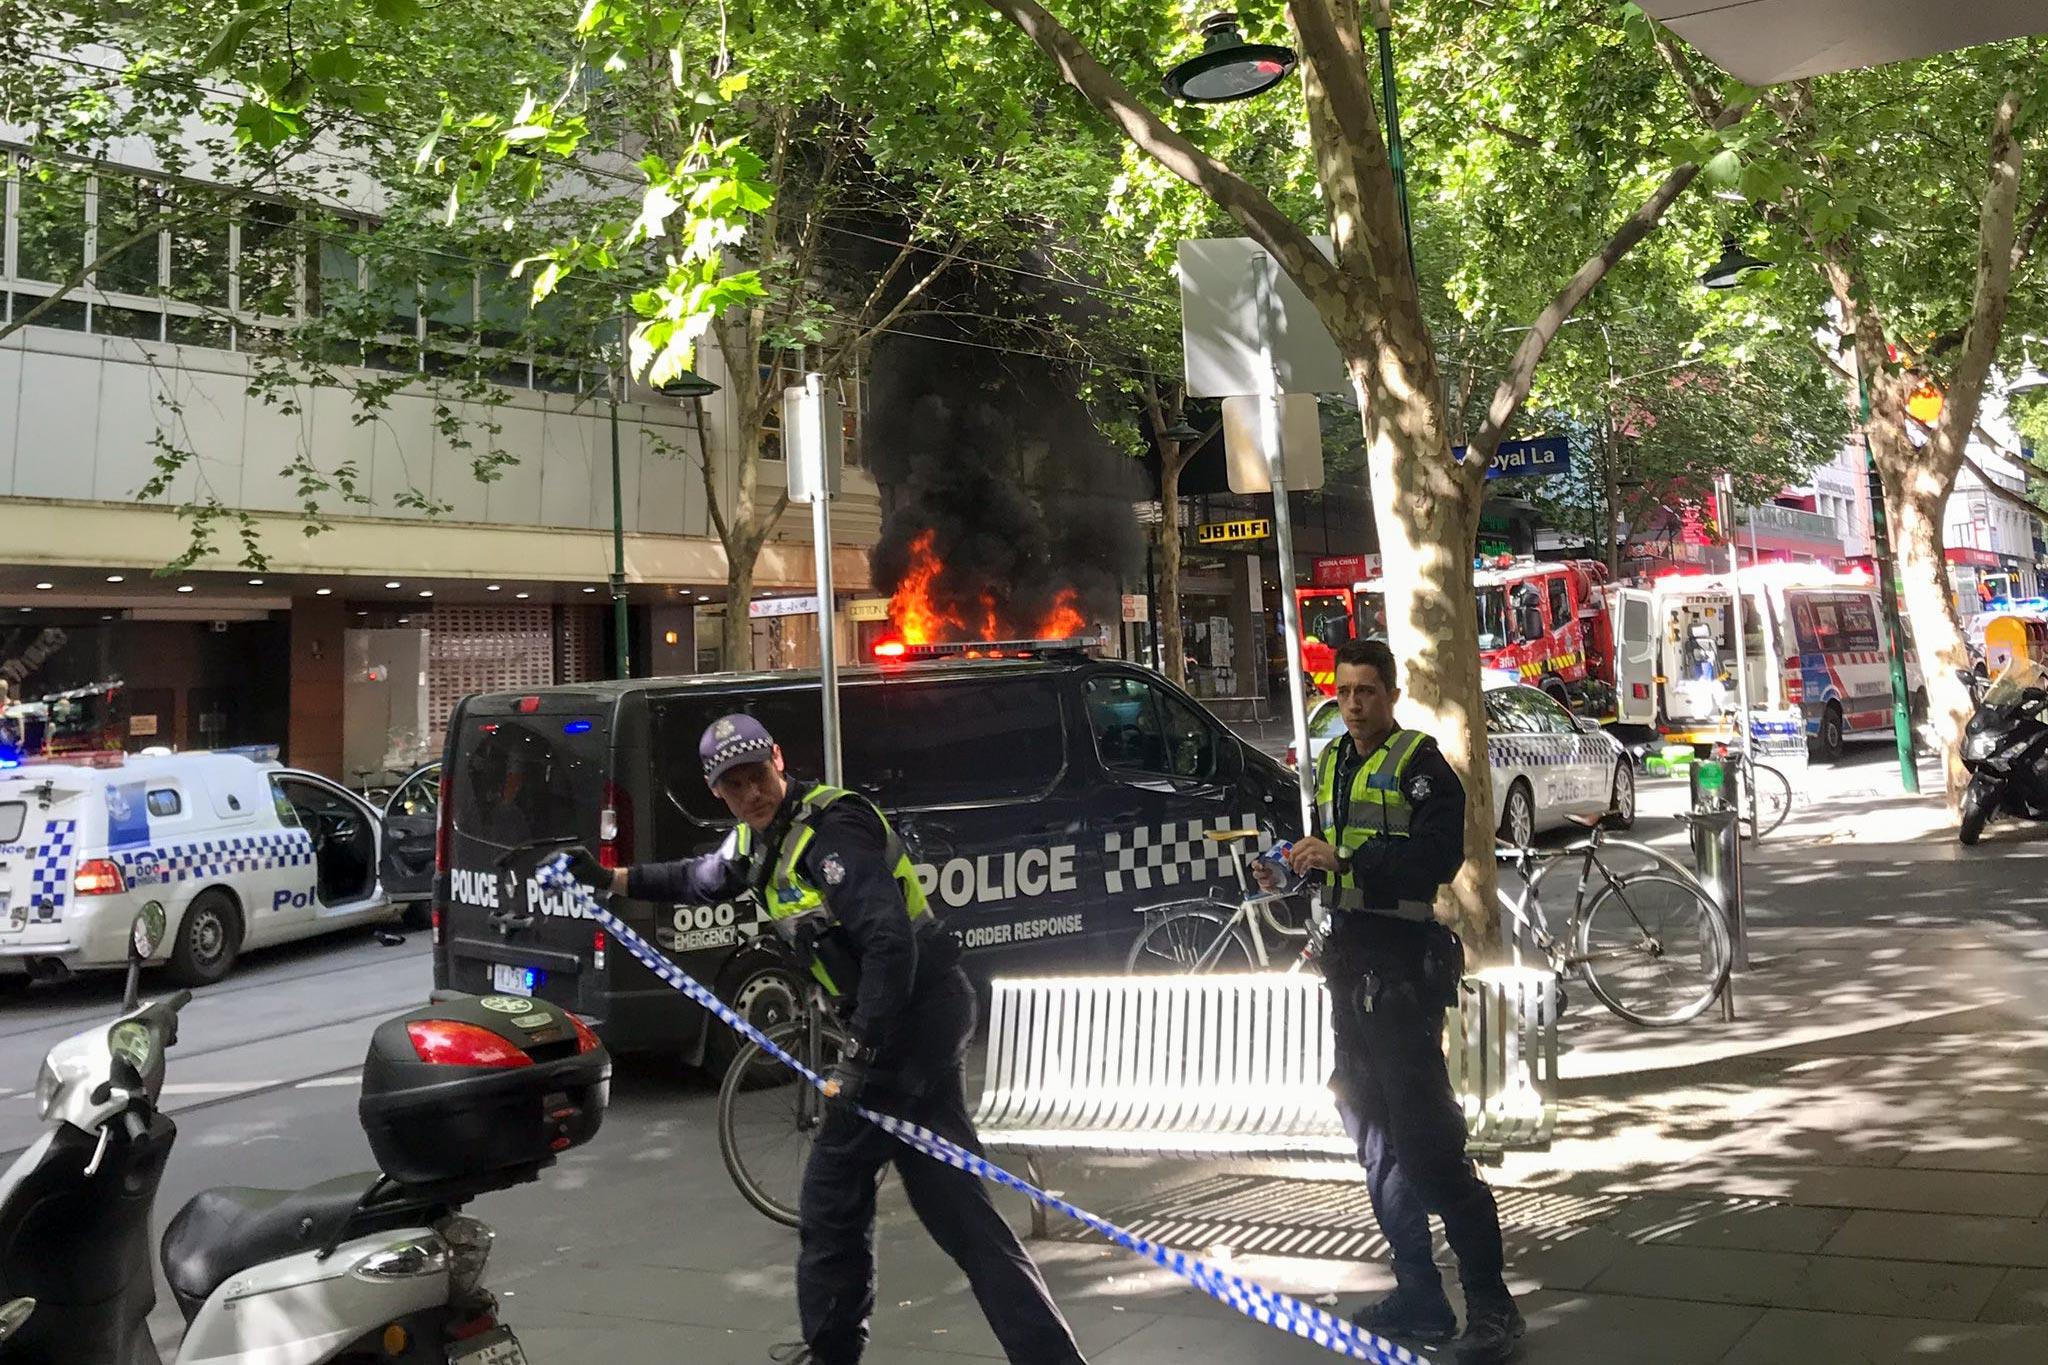 Australian police said they were treating a knife attack in Melbourne as terrorism